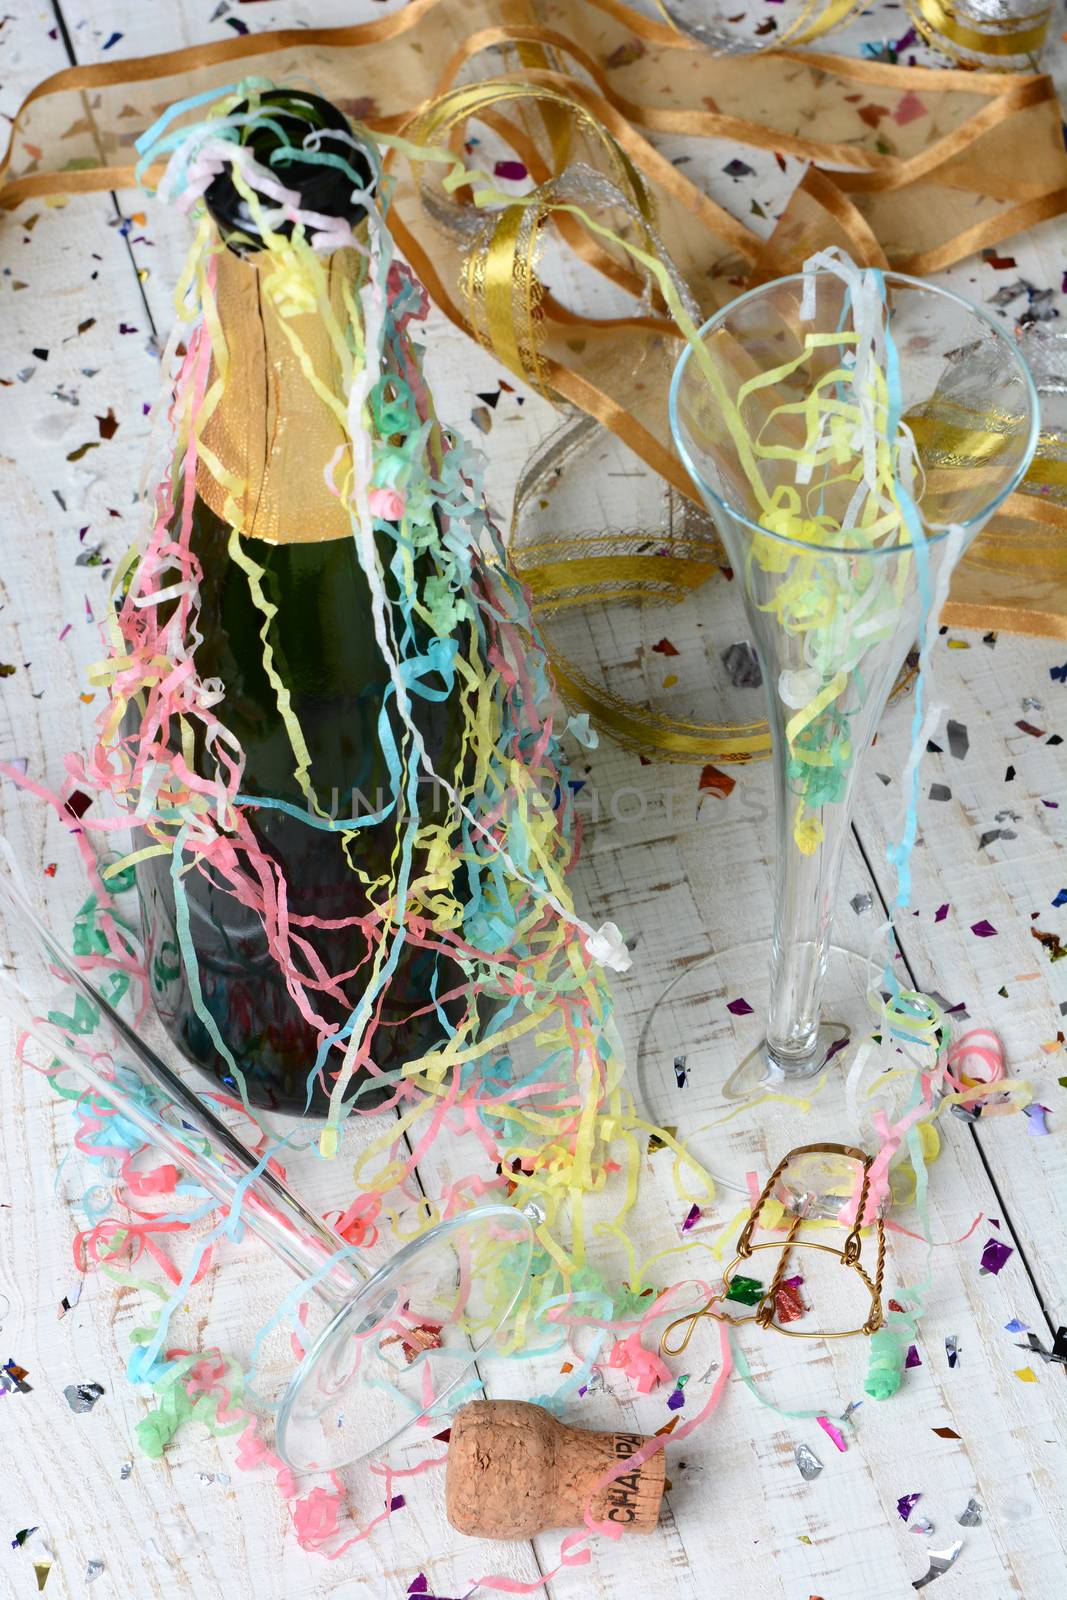 High angle shot of a Champagne bottle, streamers and confetti after a New Years Eve Party. Vertical format with shallow depth of field. Focus is on the foreground and table top.